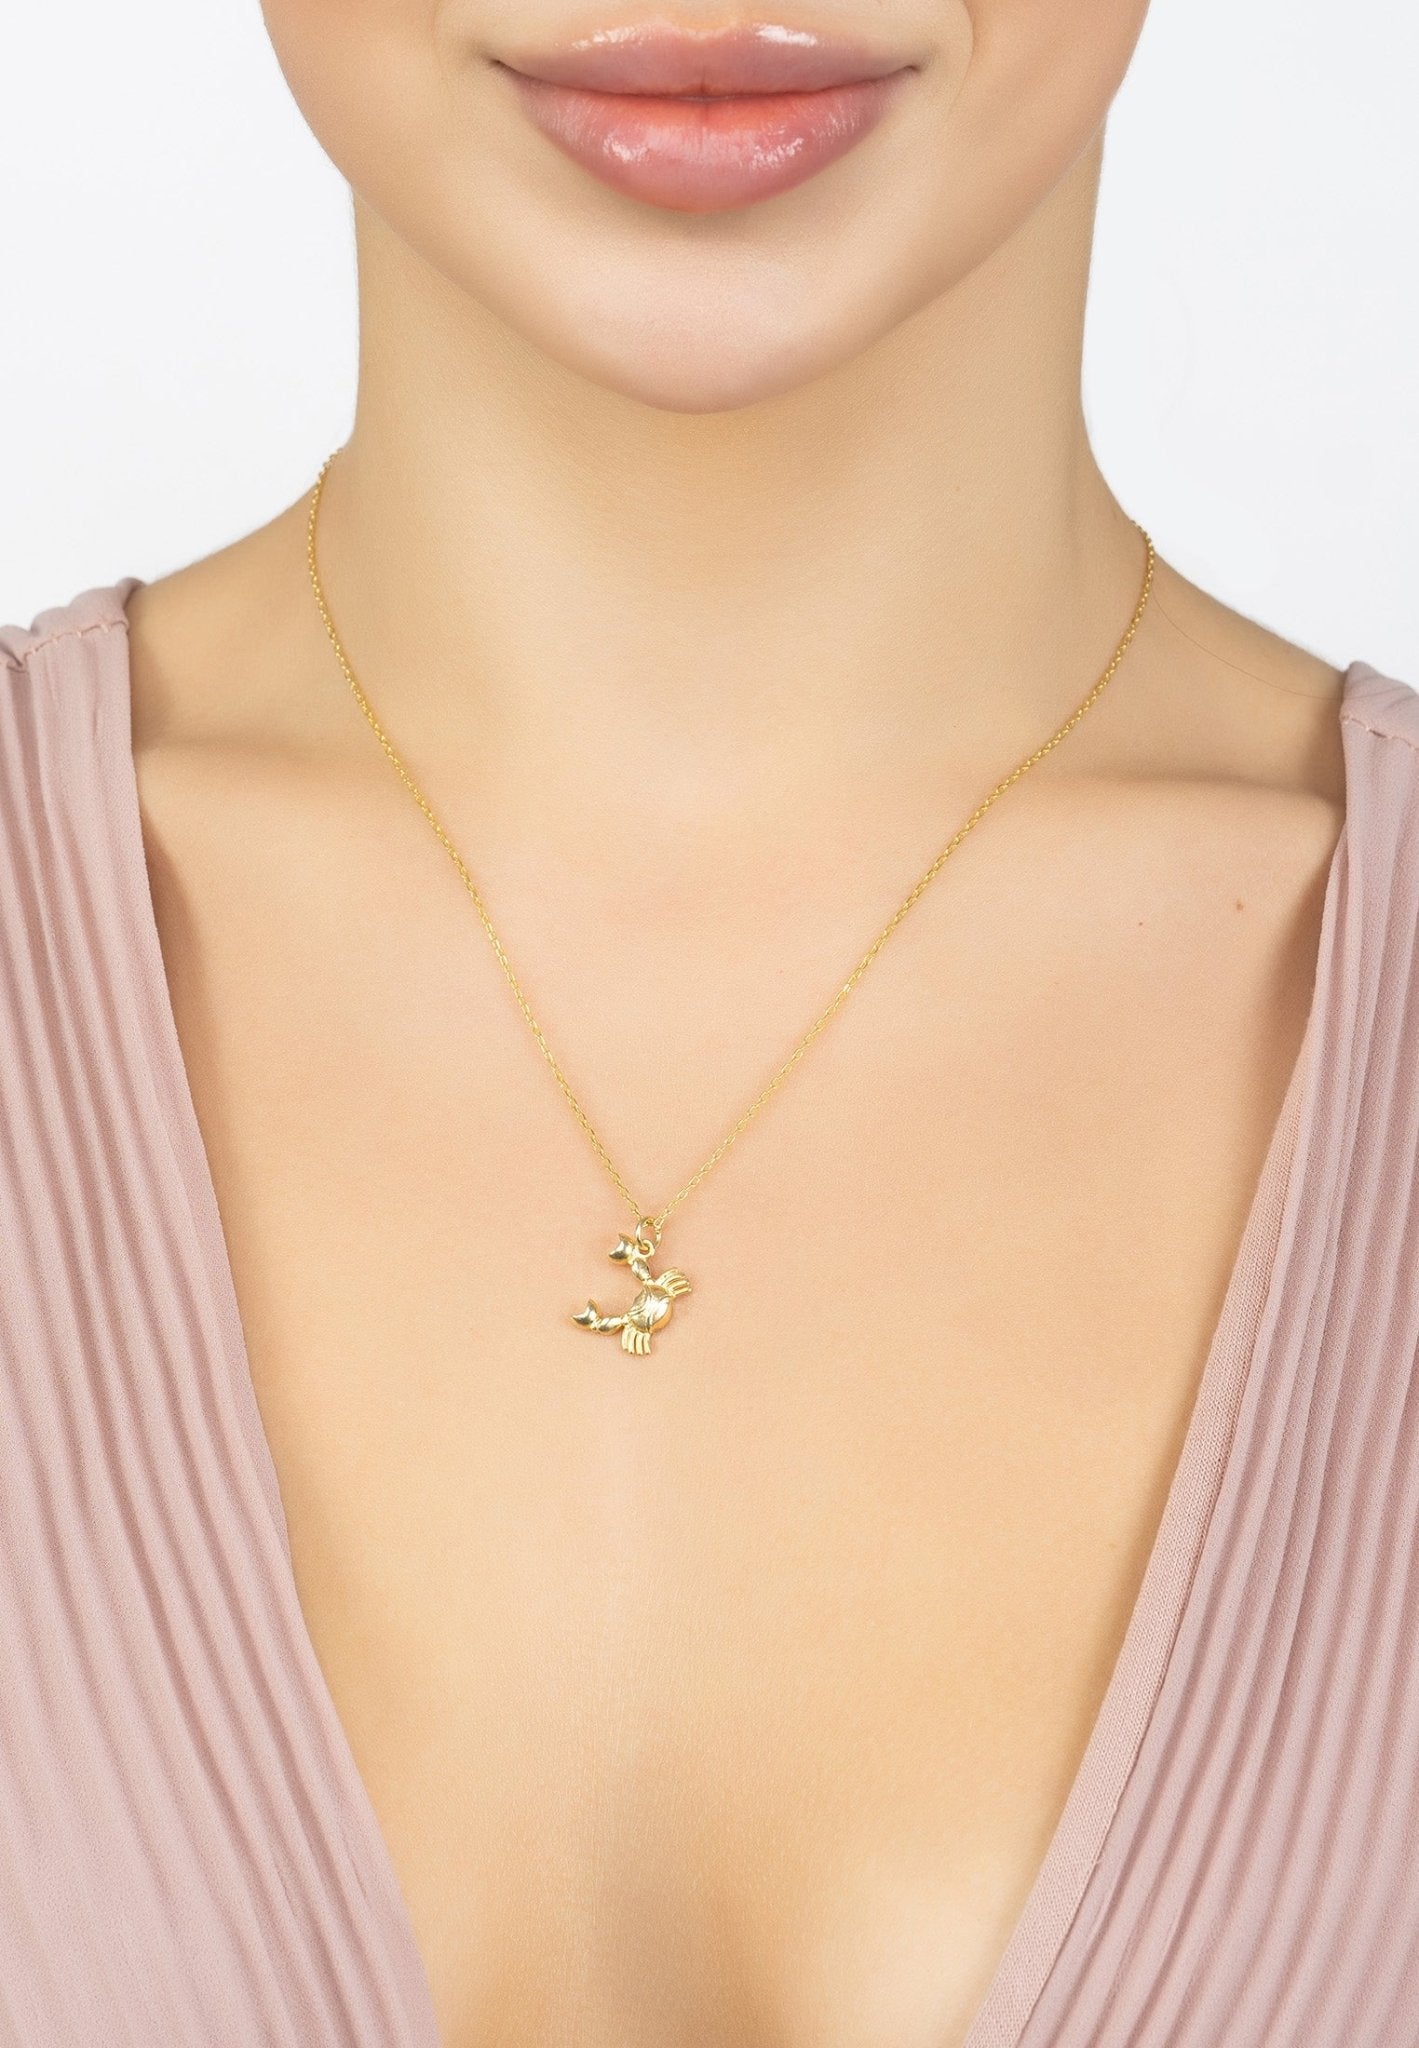 Zodiac Star Sign Necklace Gold Cancer